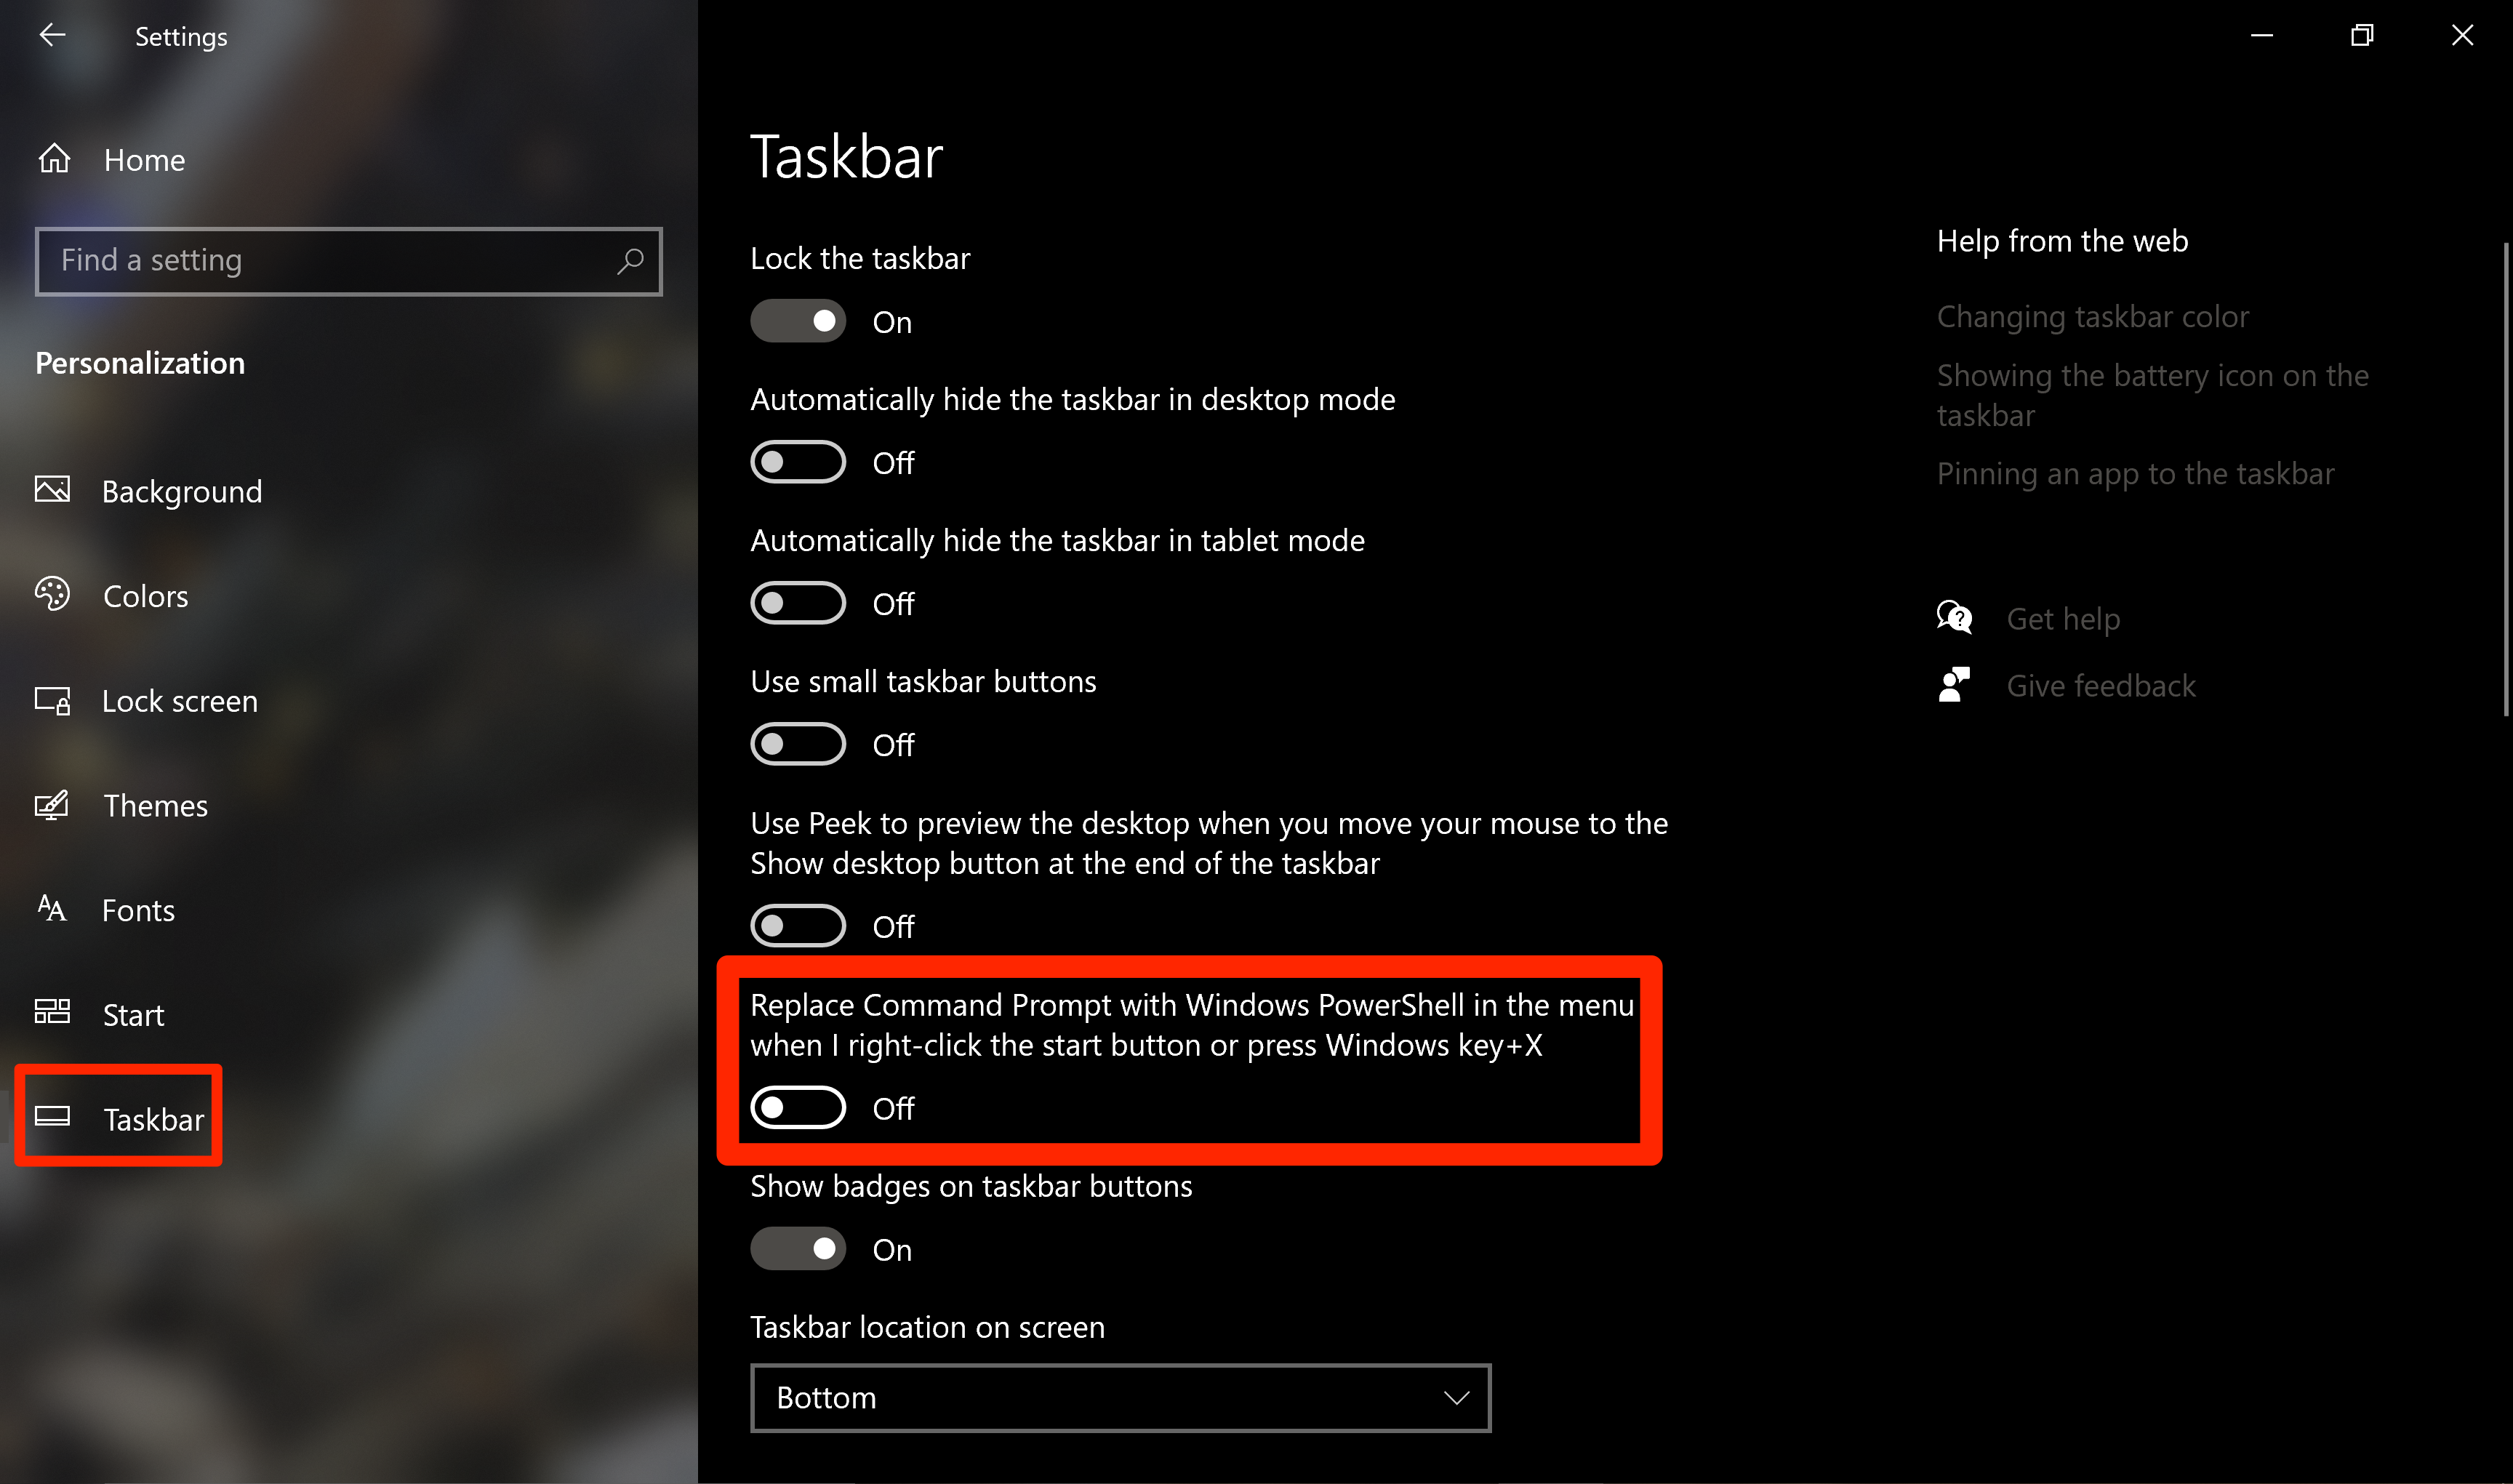 The Windows 10 Taskbar Personalization menu, with the option to disable PowerShell highlighted.